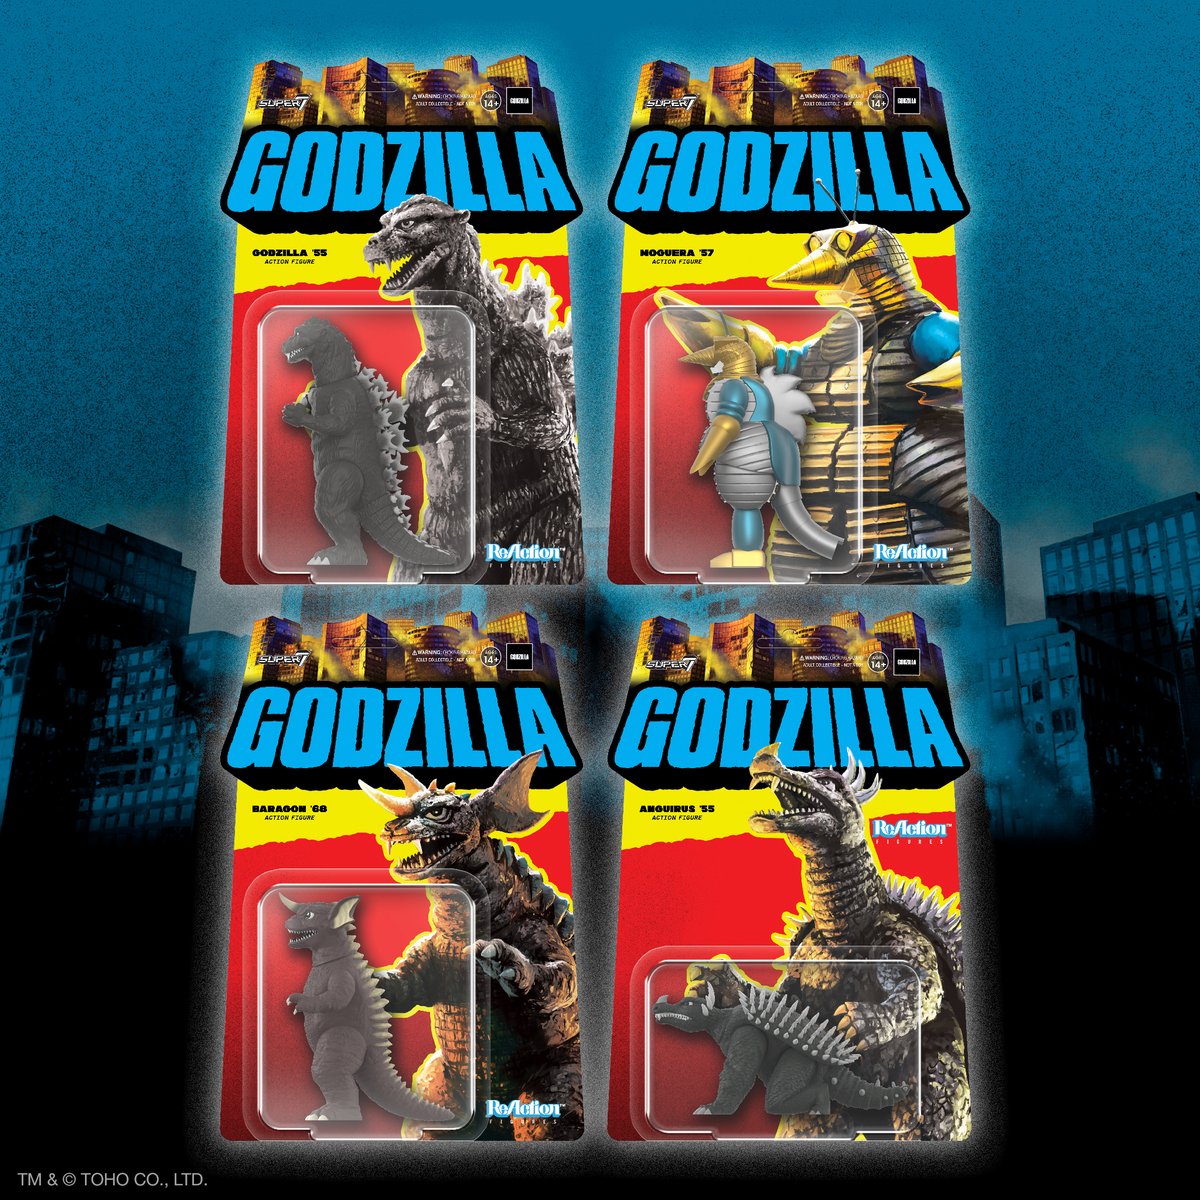 This articulated, 3.75” scale Toho ReAction Figure of Godzilla ‘55 comes in a grayscale color scheme, inspired by the kaiju’s appearance in the 1955 film Godzilla Raids Again. Available now at Super7.com! #Super7